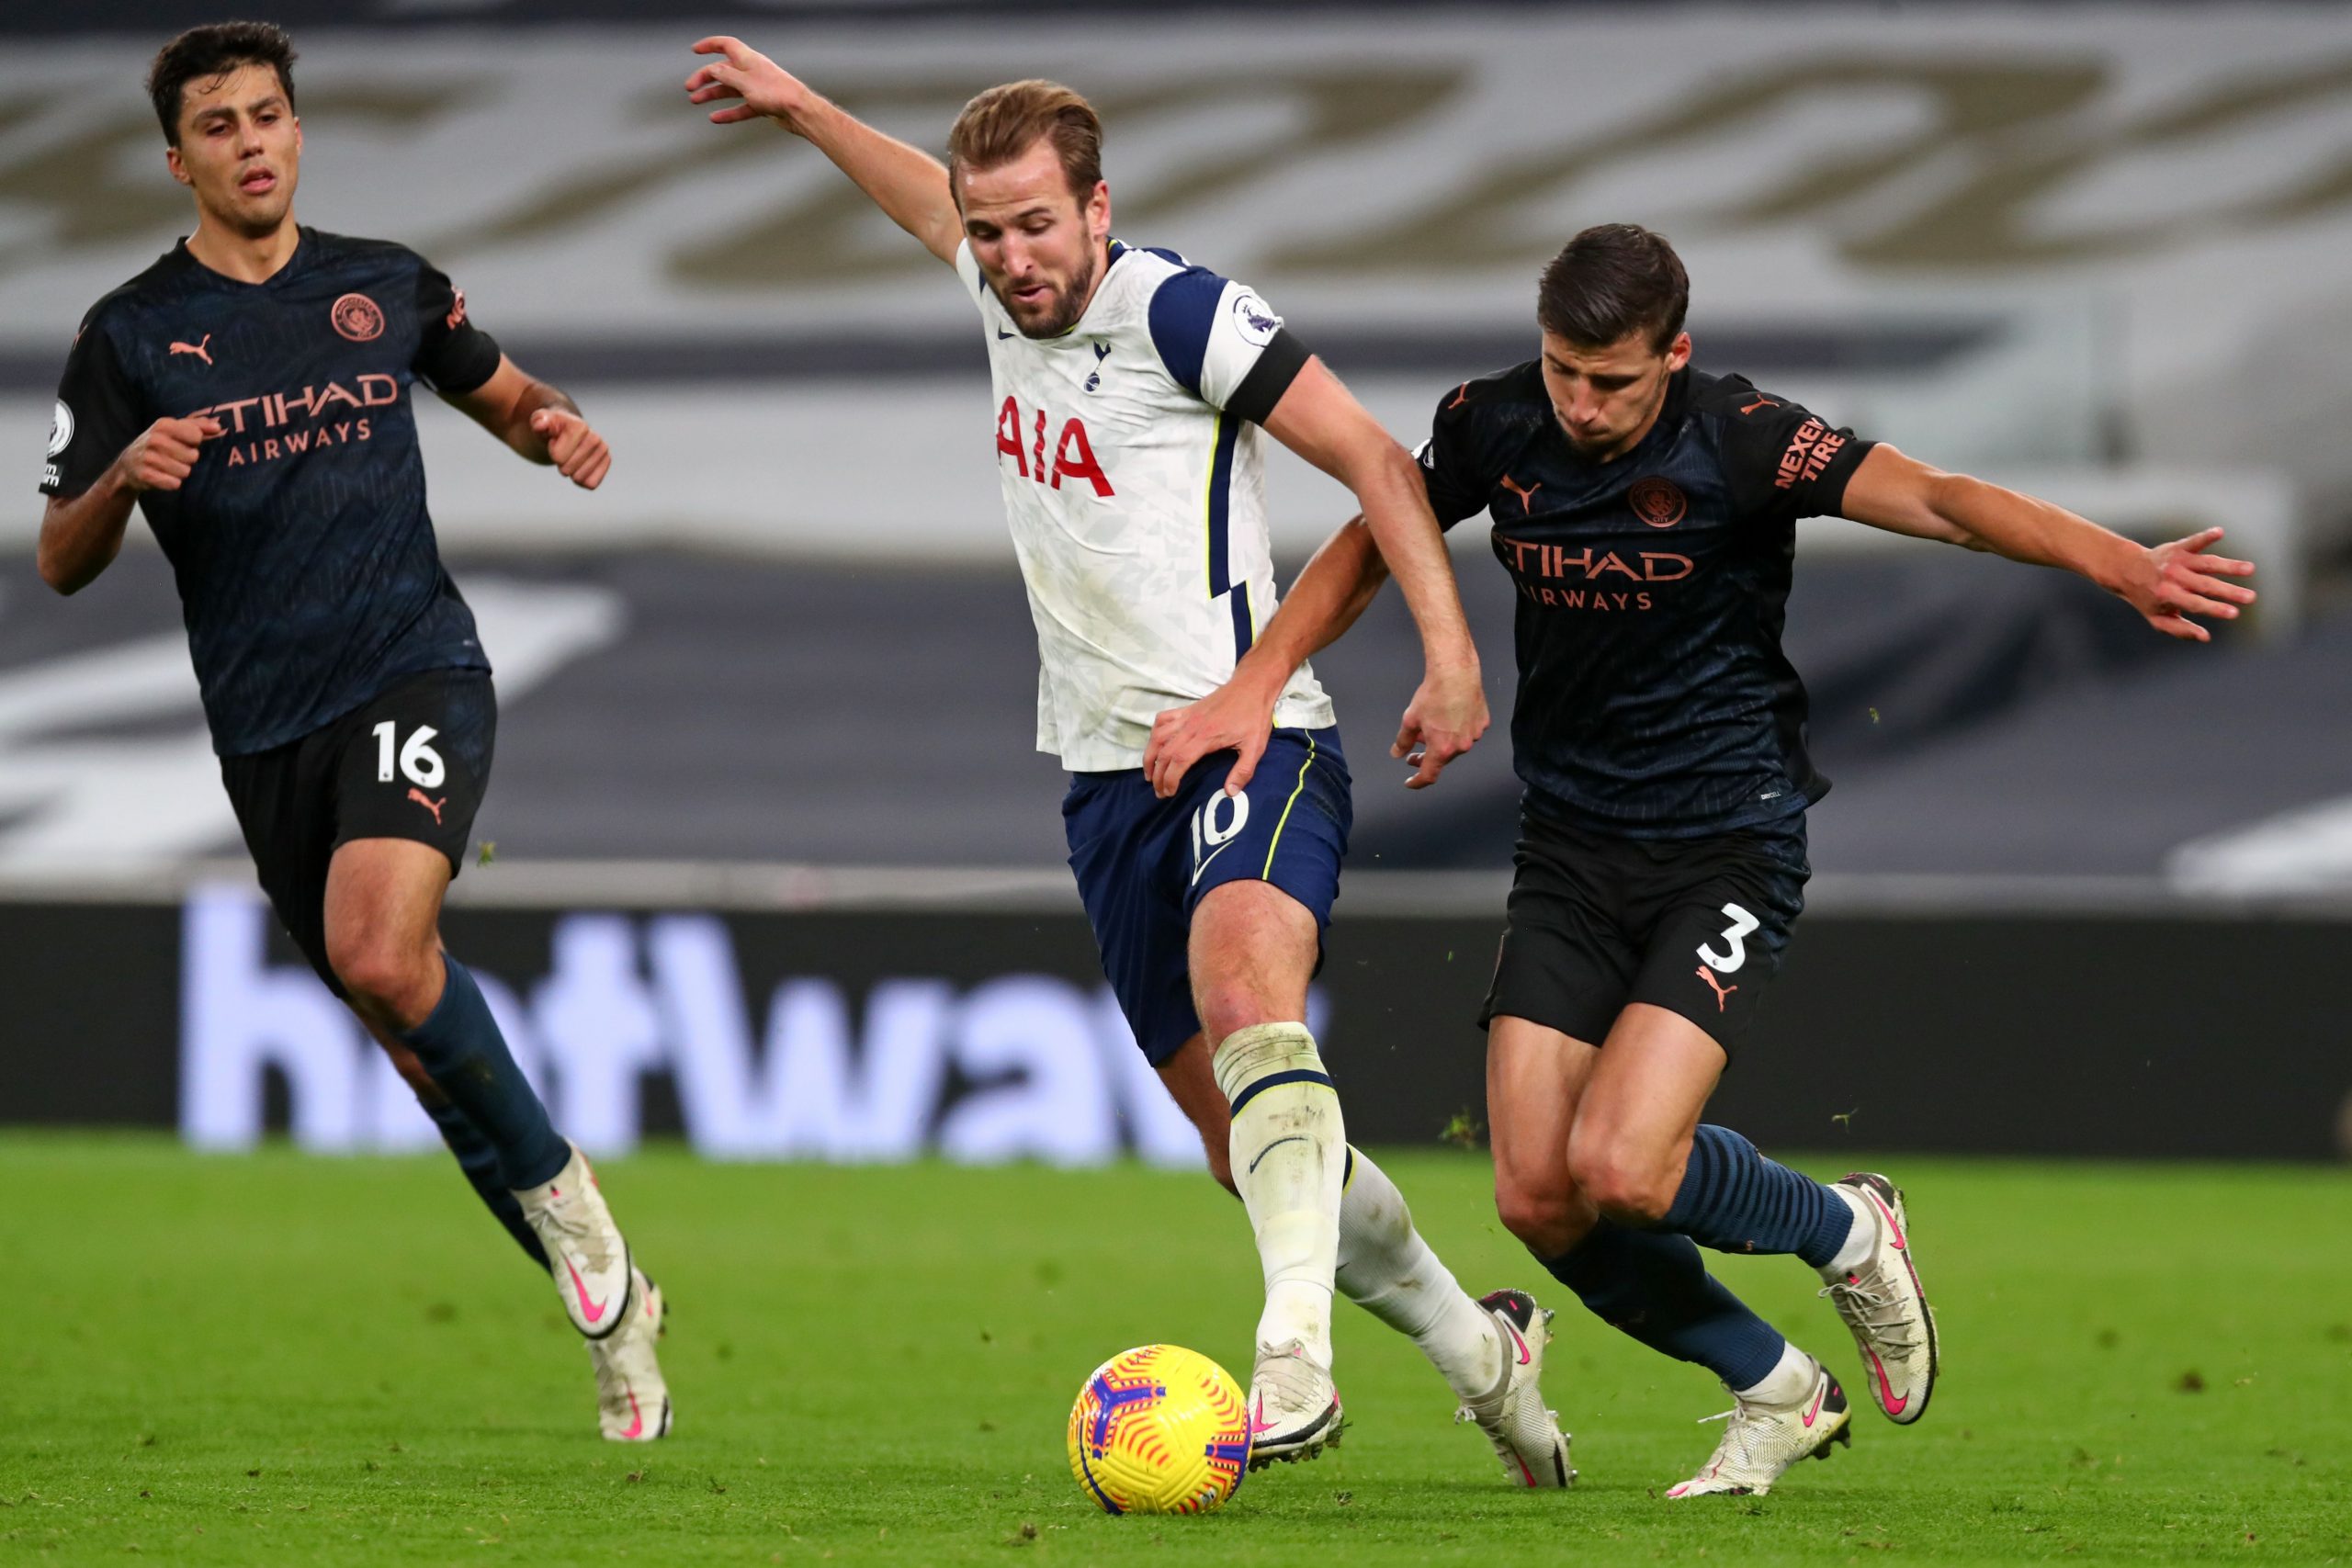 Paul Merson urges Manchester United to move in for Kane who is in action in the picture